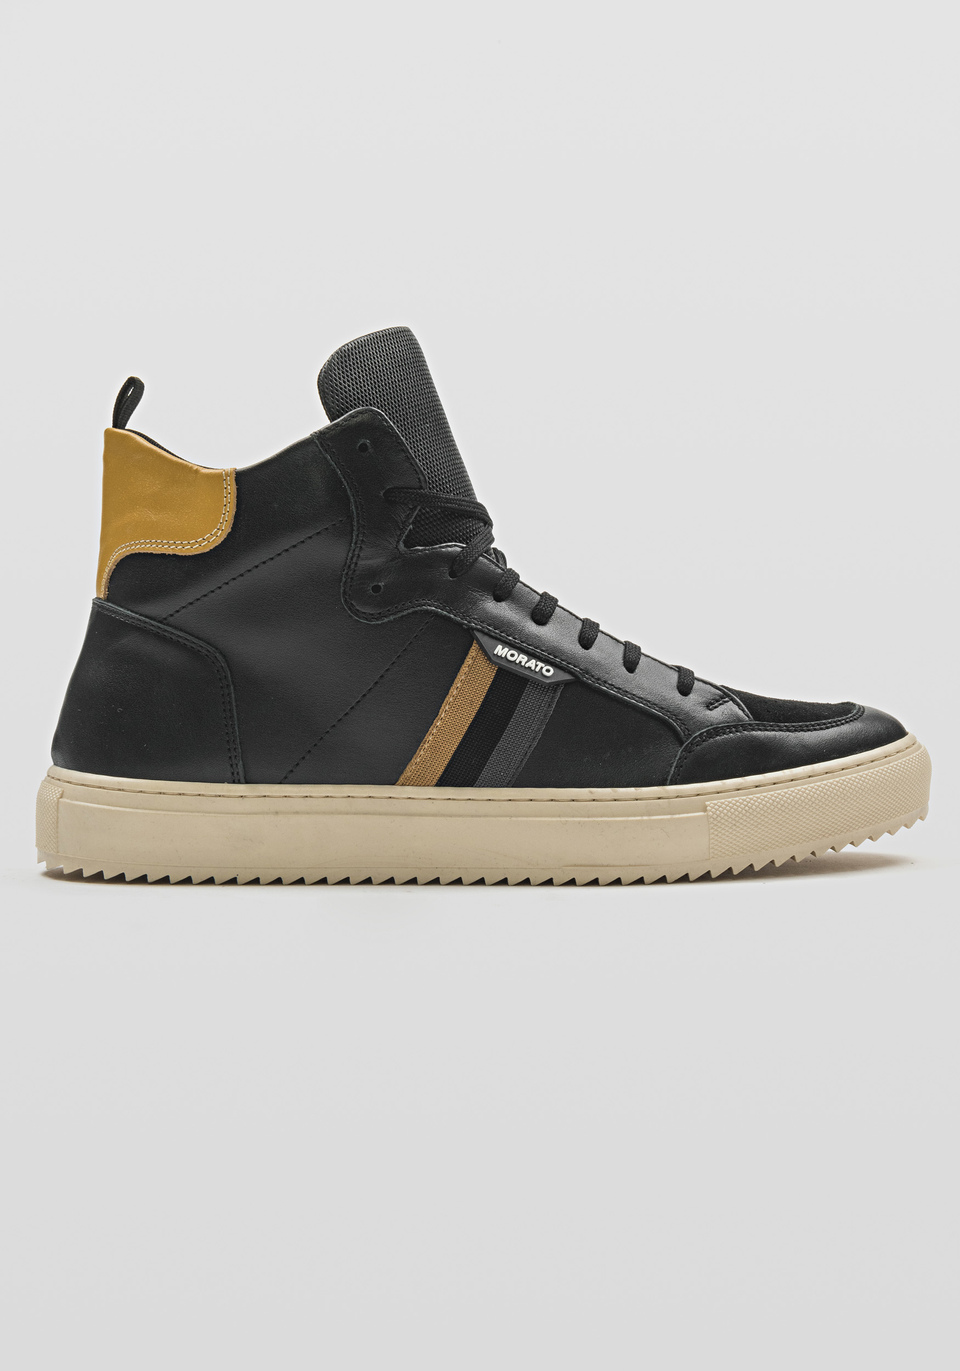 "DAMME" HIGH-TOP SNEAKER IN SOFT NAPPA LEATHER WITH STRIPED TAPE - Antony Morato Online Shop